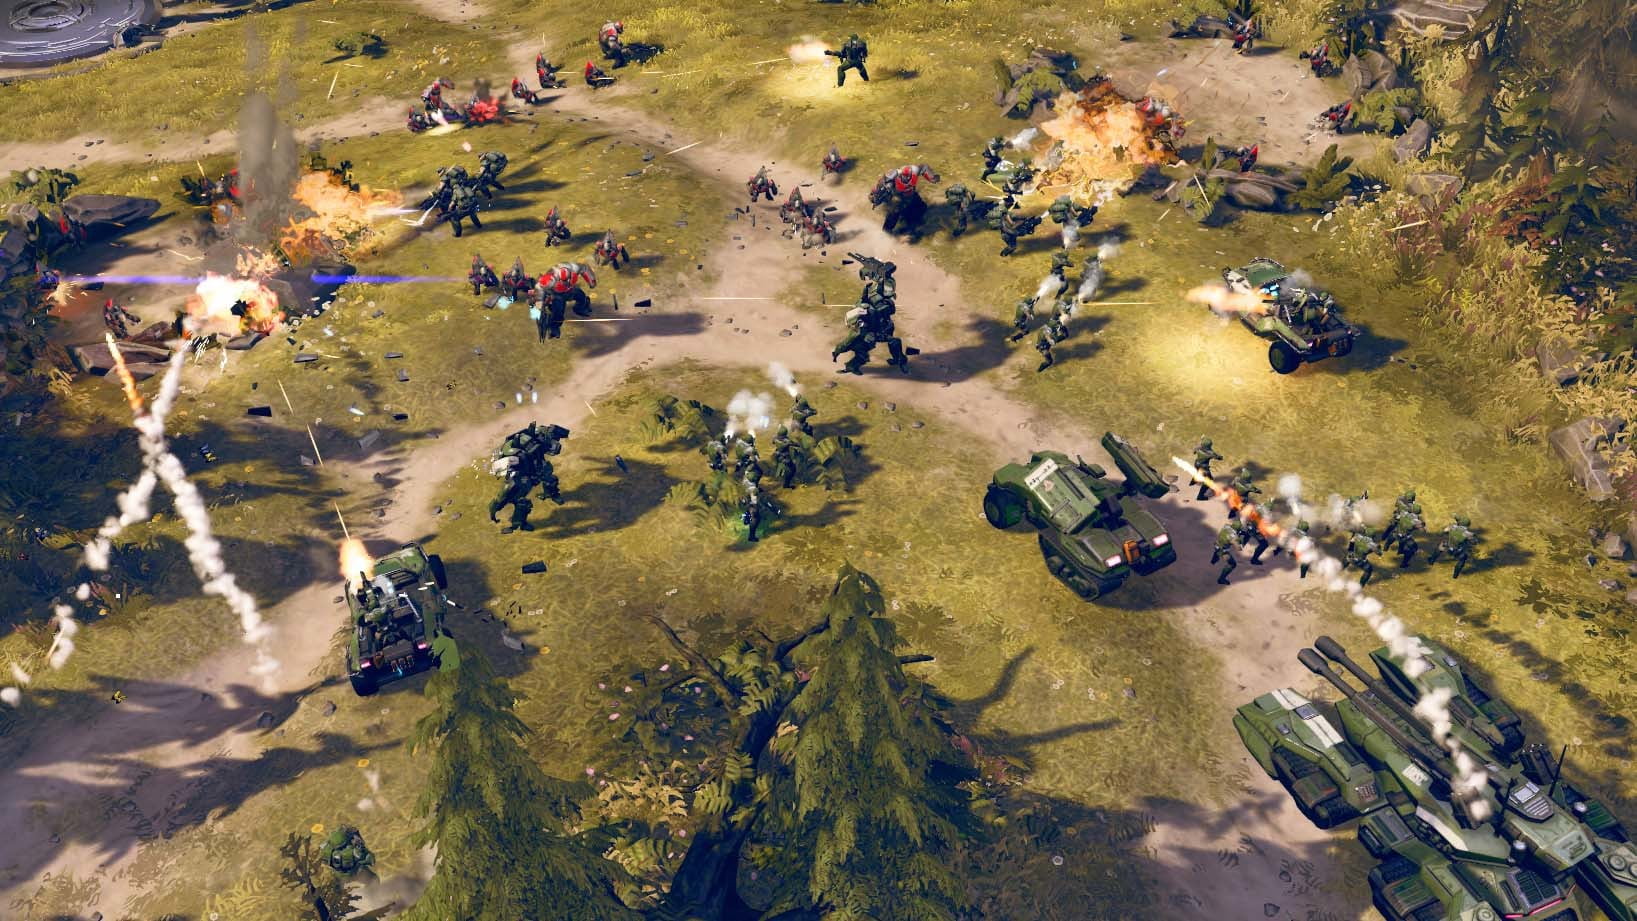 Halo Wars 2 Free Download For PC